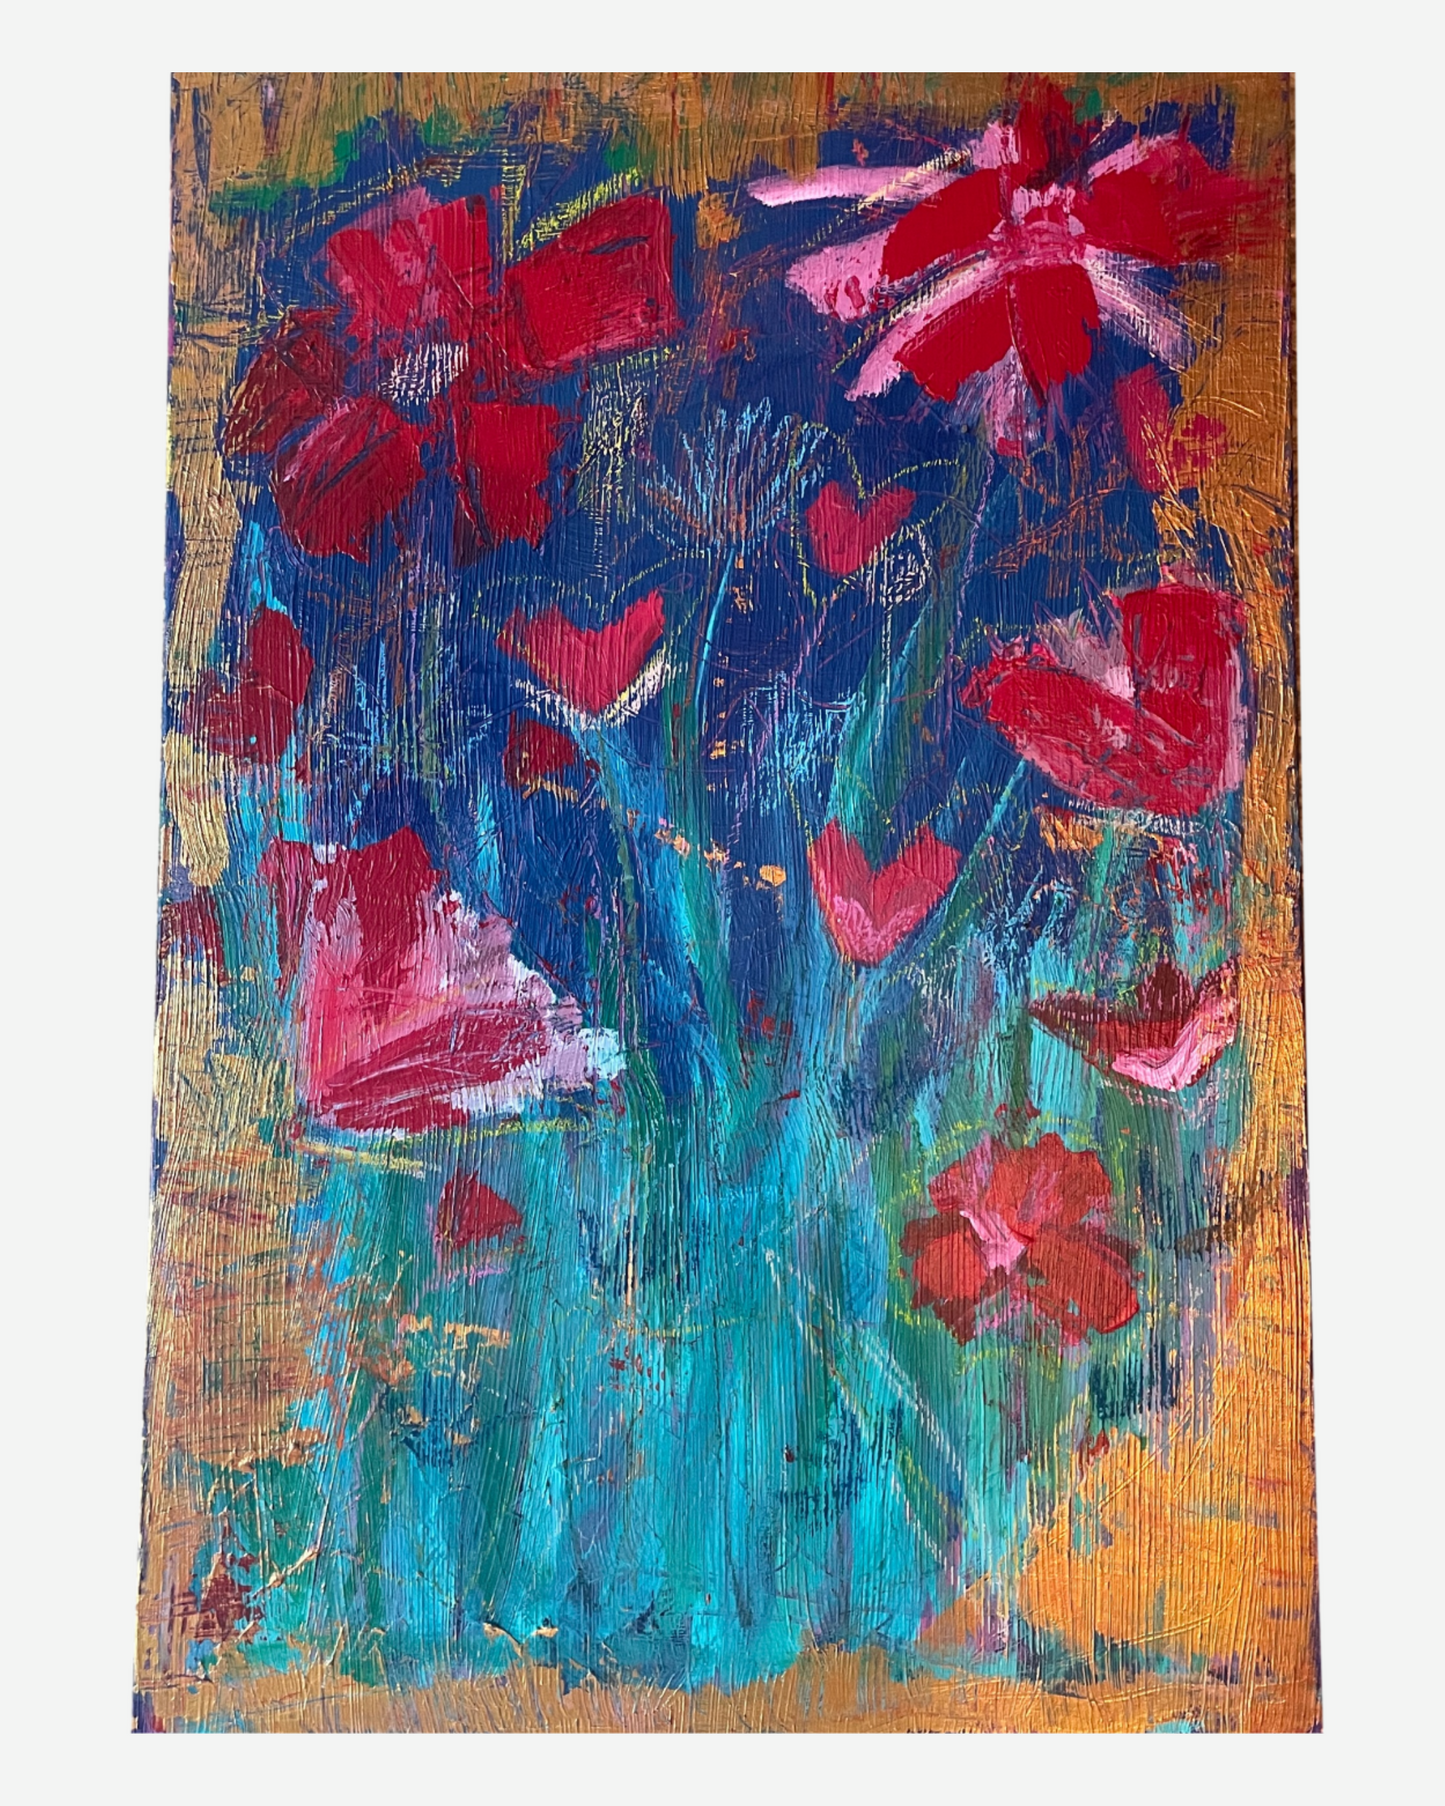 Ruby Toned Garden is a 24 x 36 original painting with mixed media on linen canvas by Kent Collective